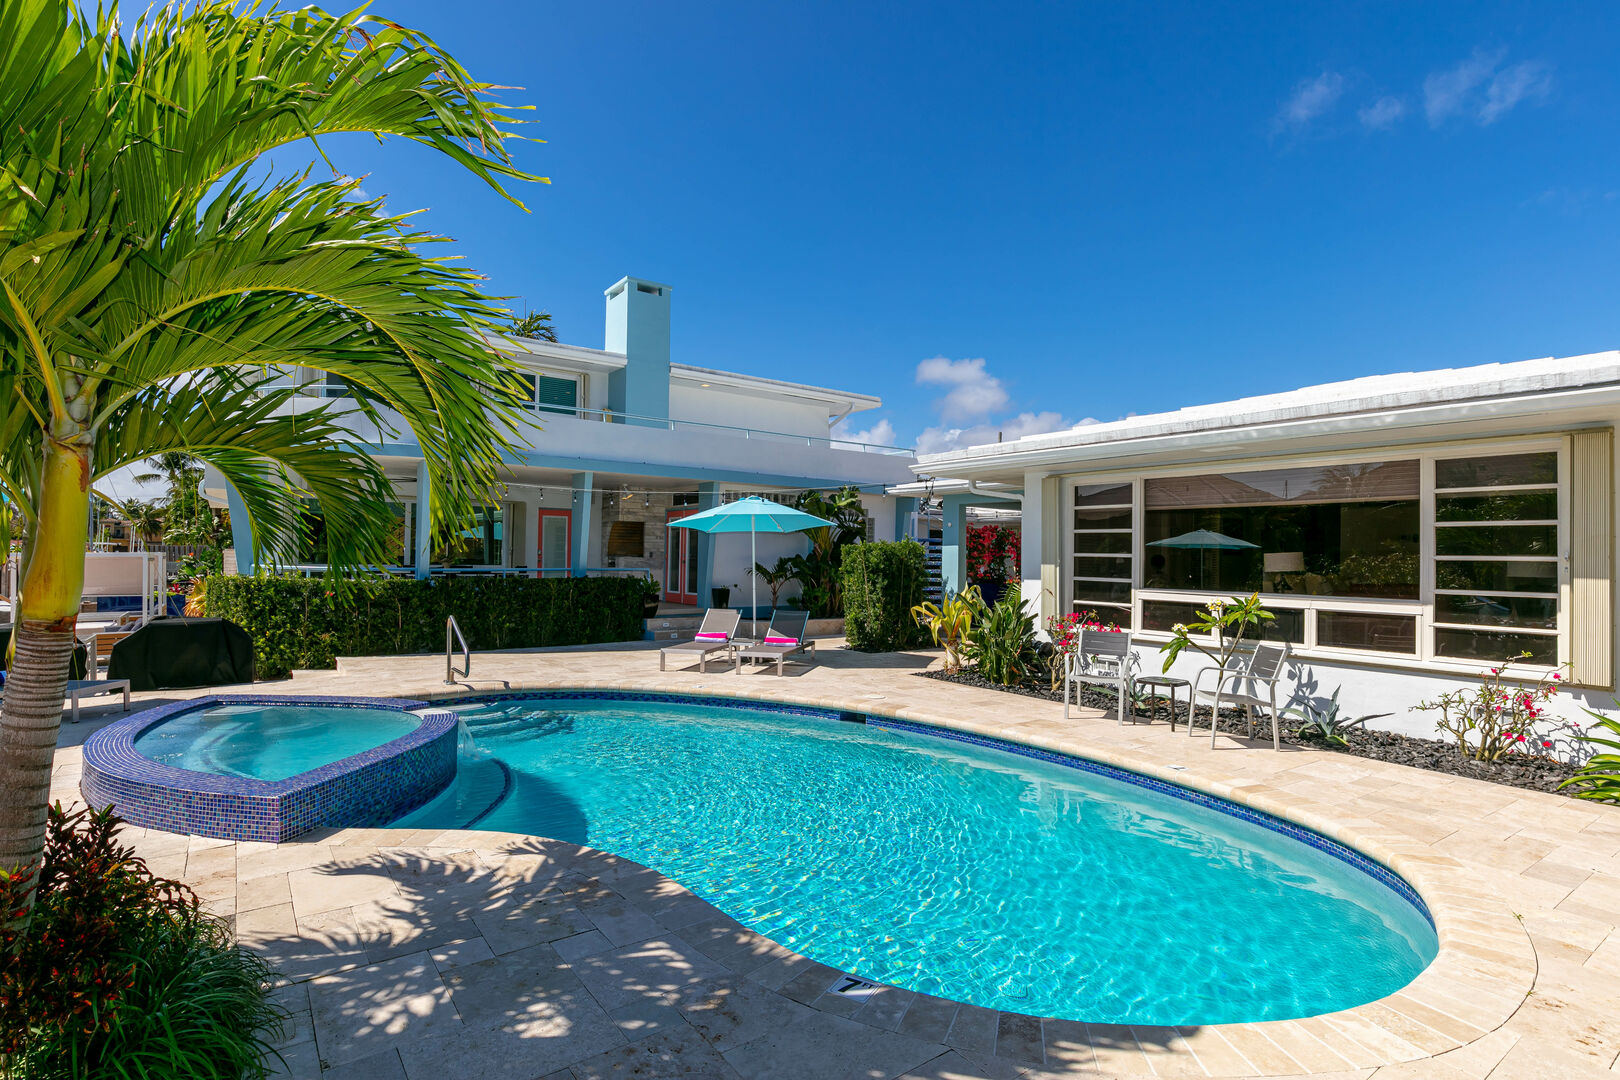 The year round heated pool is large enough to accommodate everyone at Salt Aire Key